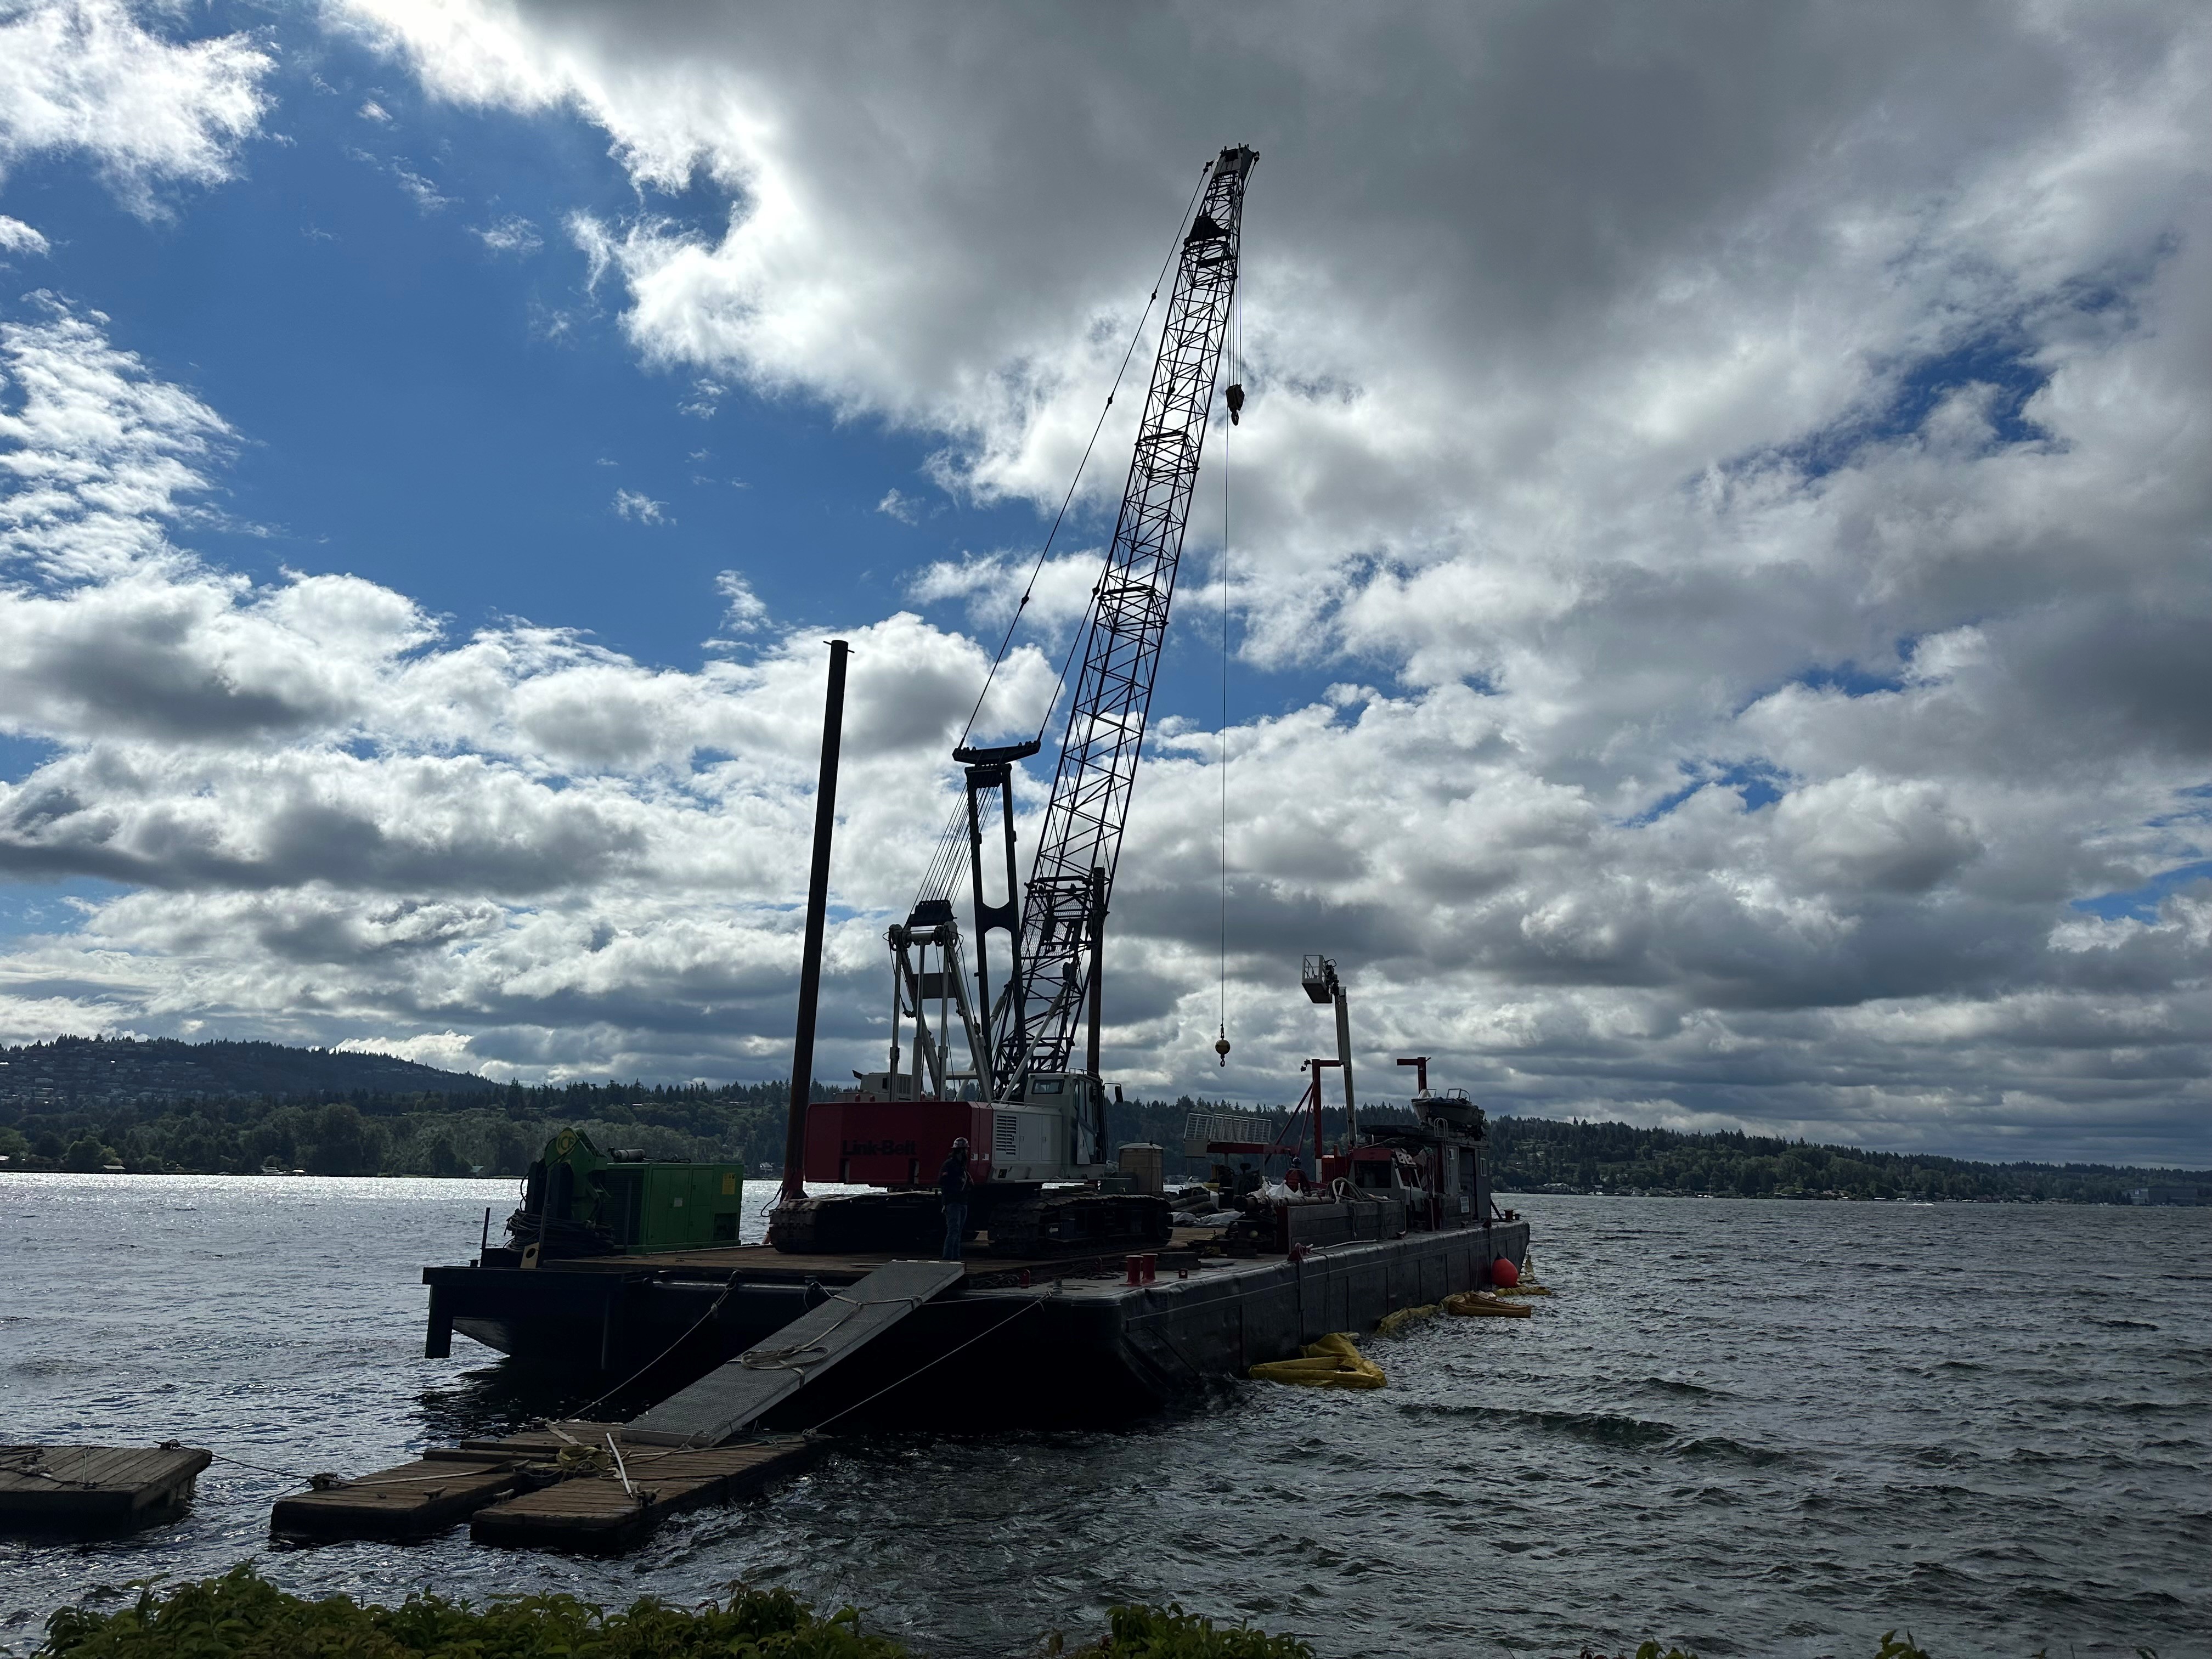 Barge on lake with creosote-treated pilings